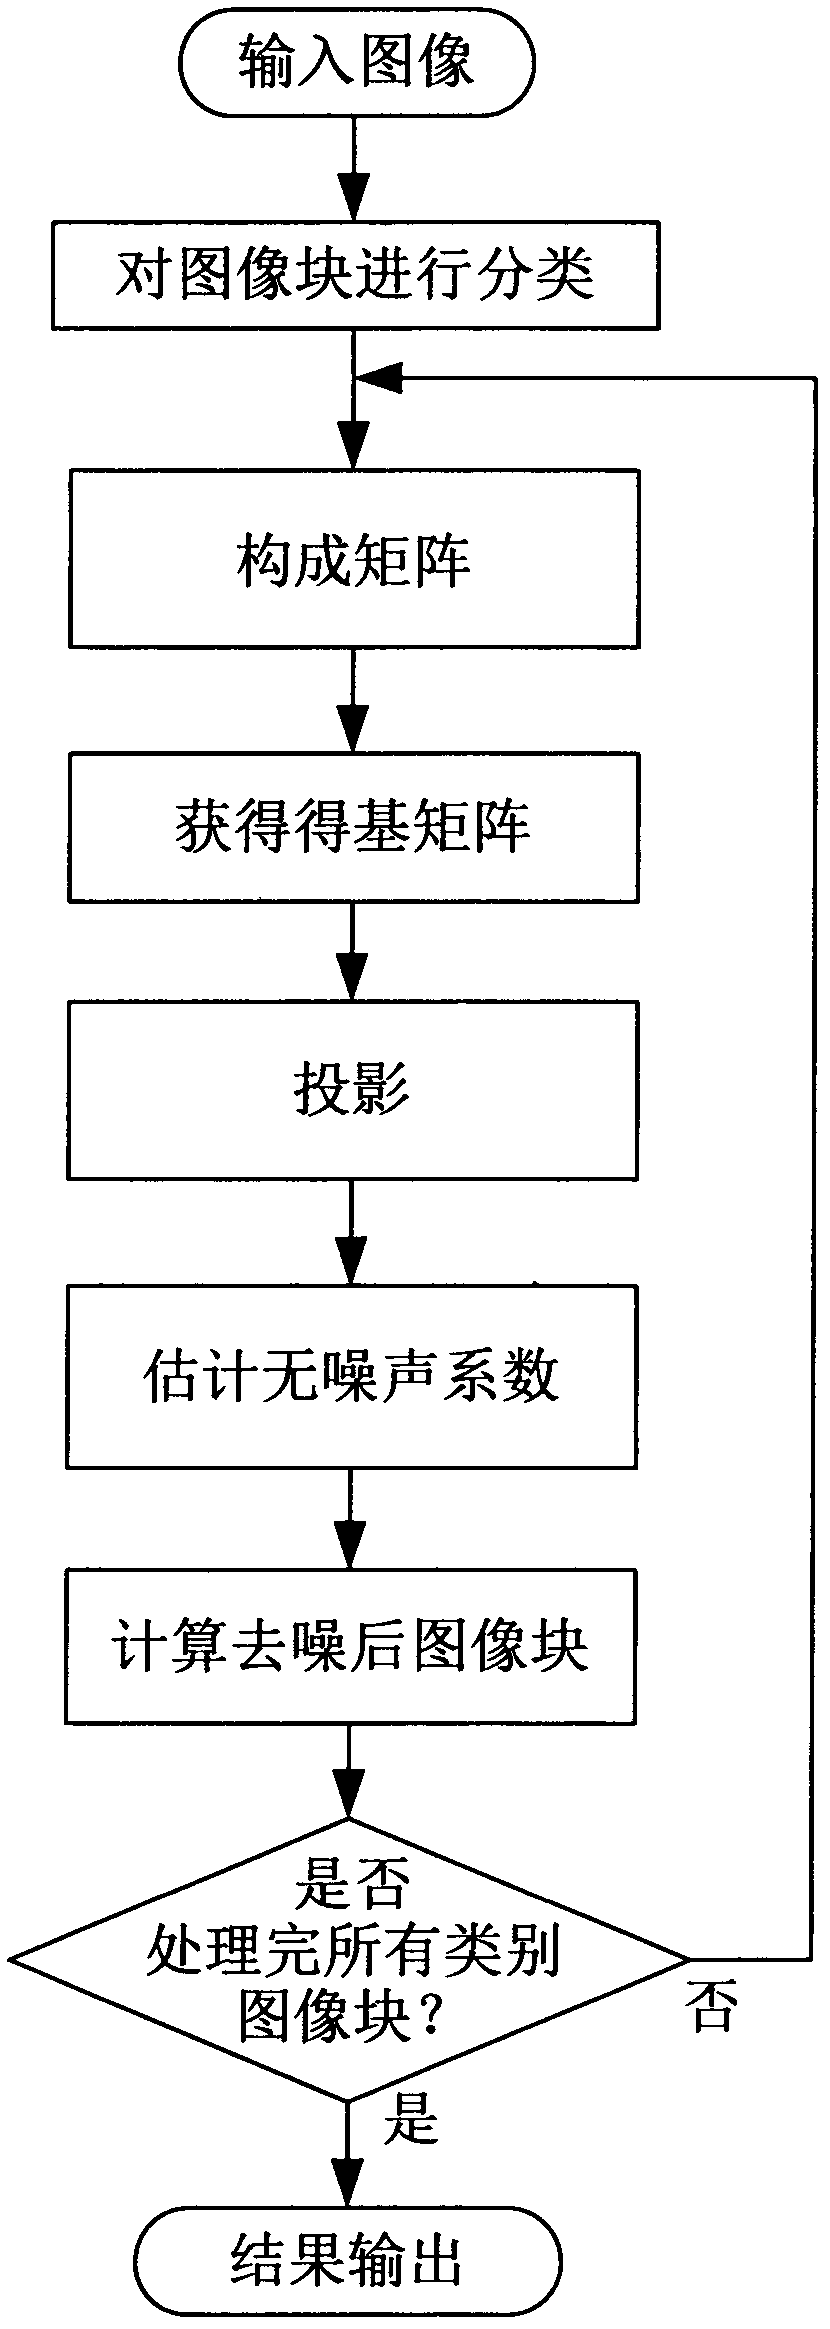 Image denoising method based on Treelet switch and Gaussian scale mixture model